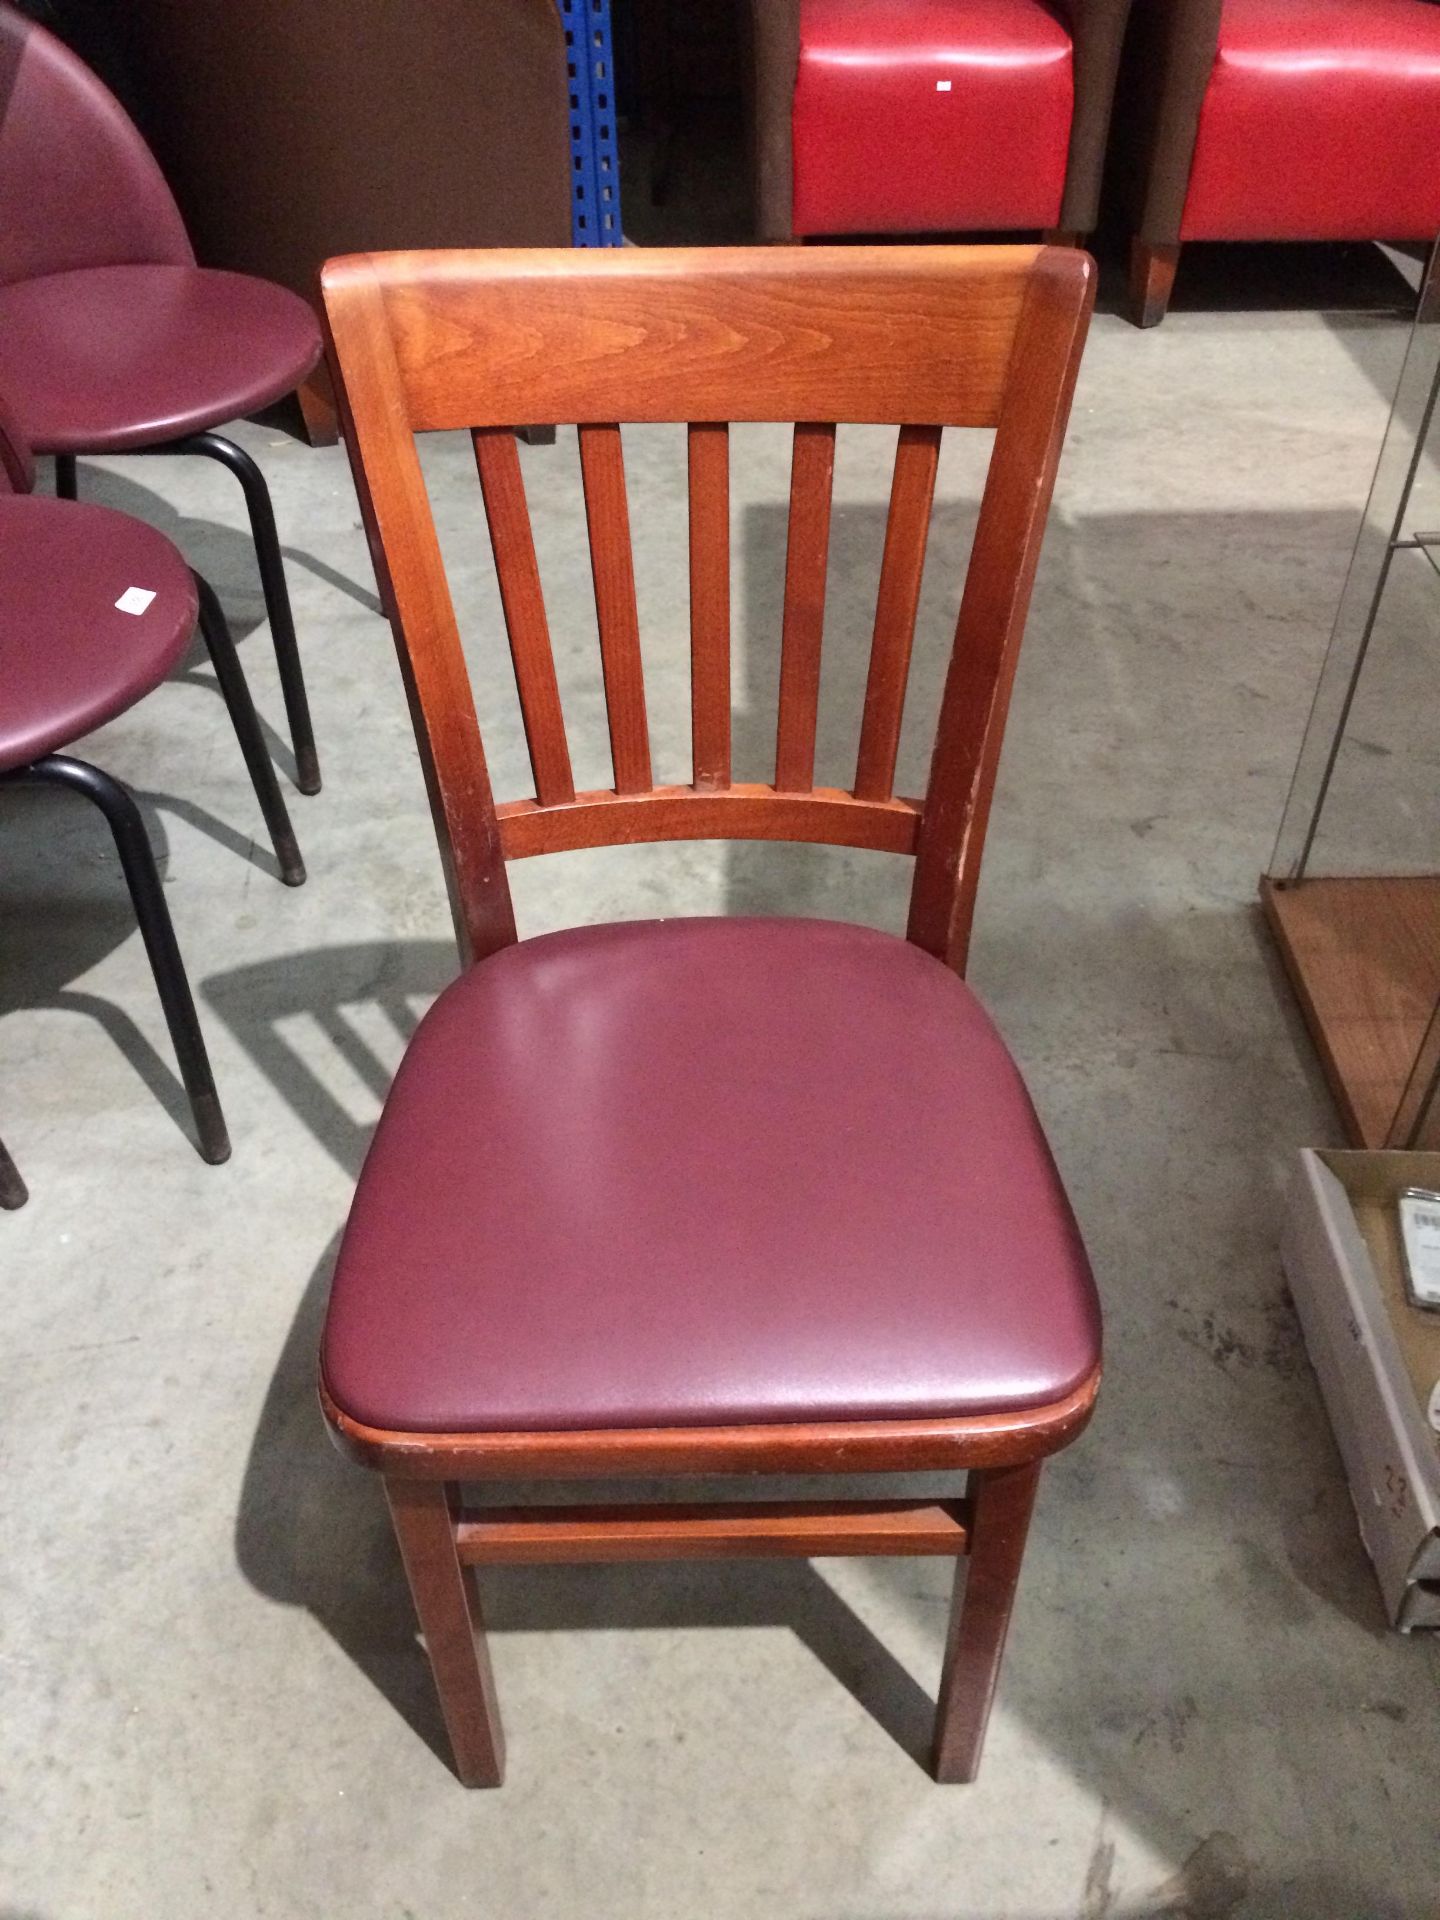 4 x dark oak ladder back cafe/bar chairs with purple vinyl upholstery